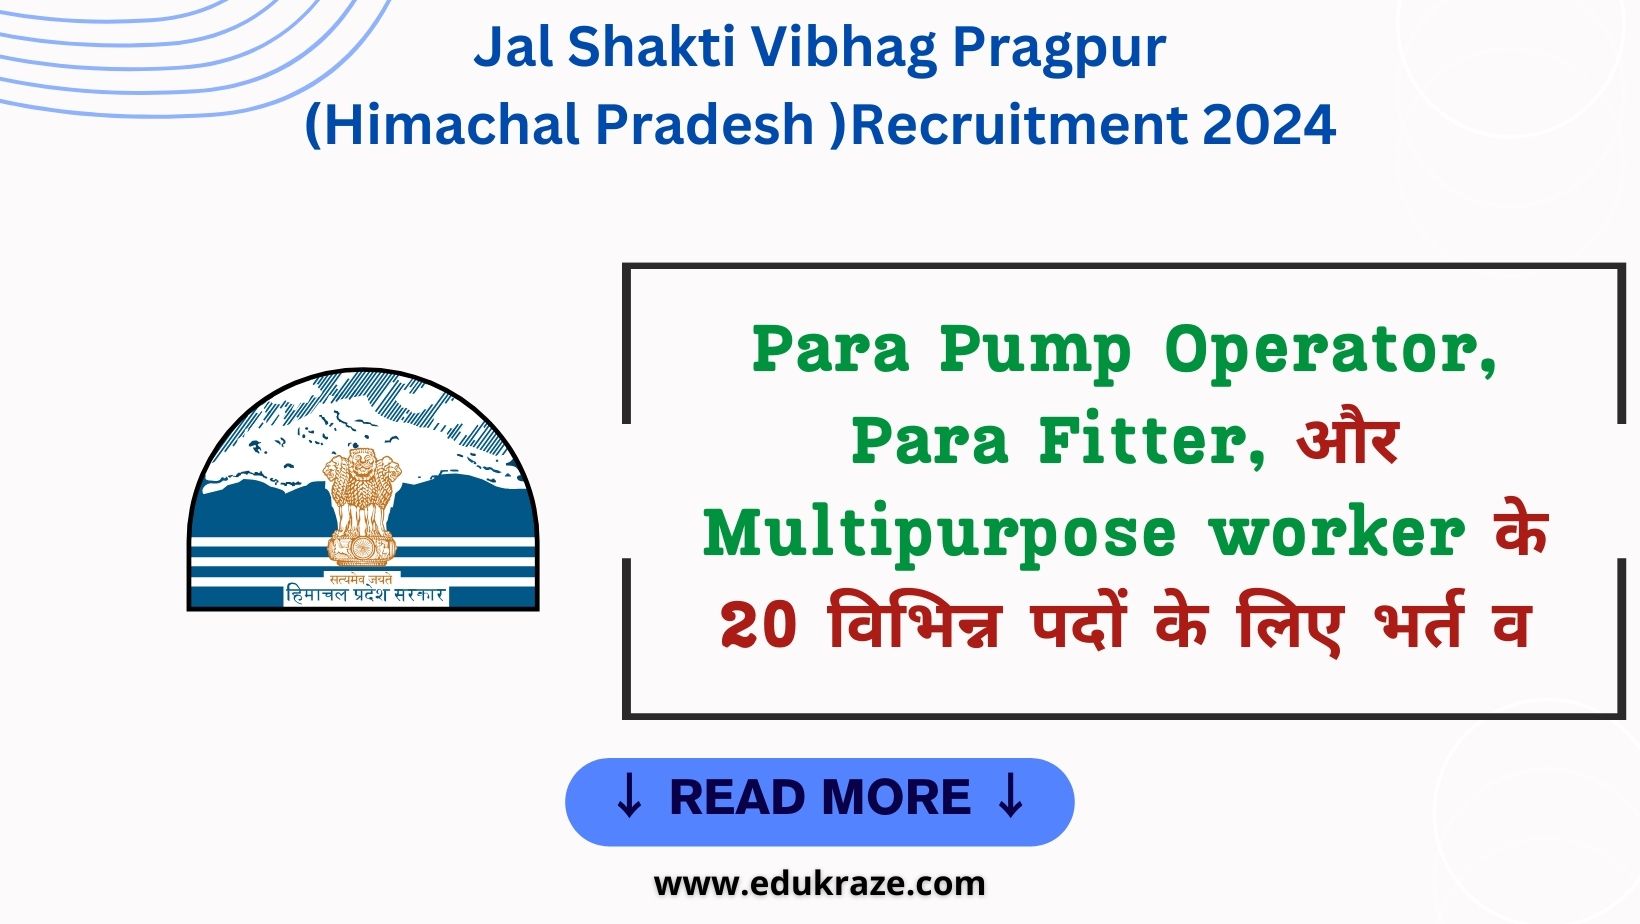 HP Jal Shakti Vibhag Division Pragpur announces recruitment for Para Pump Operator, Para Fitter, and Multipurpose Worker with 20 available positions.